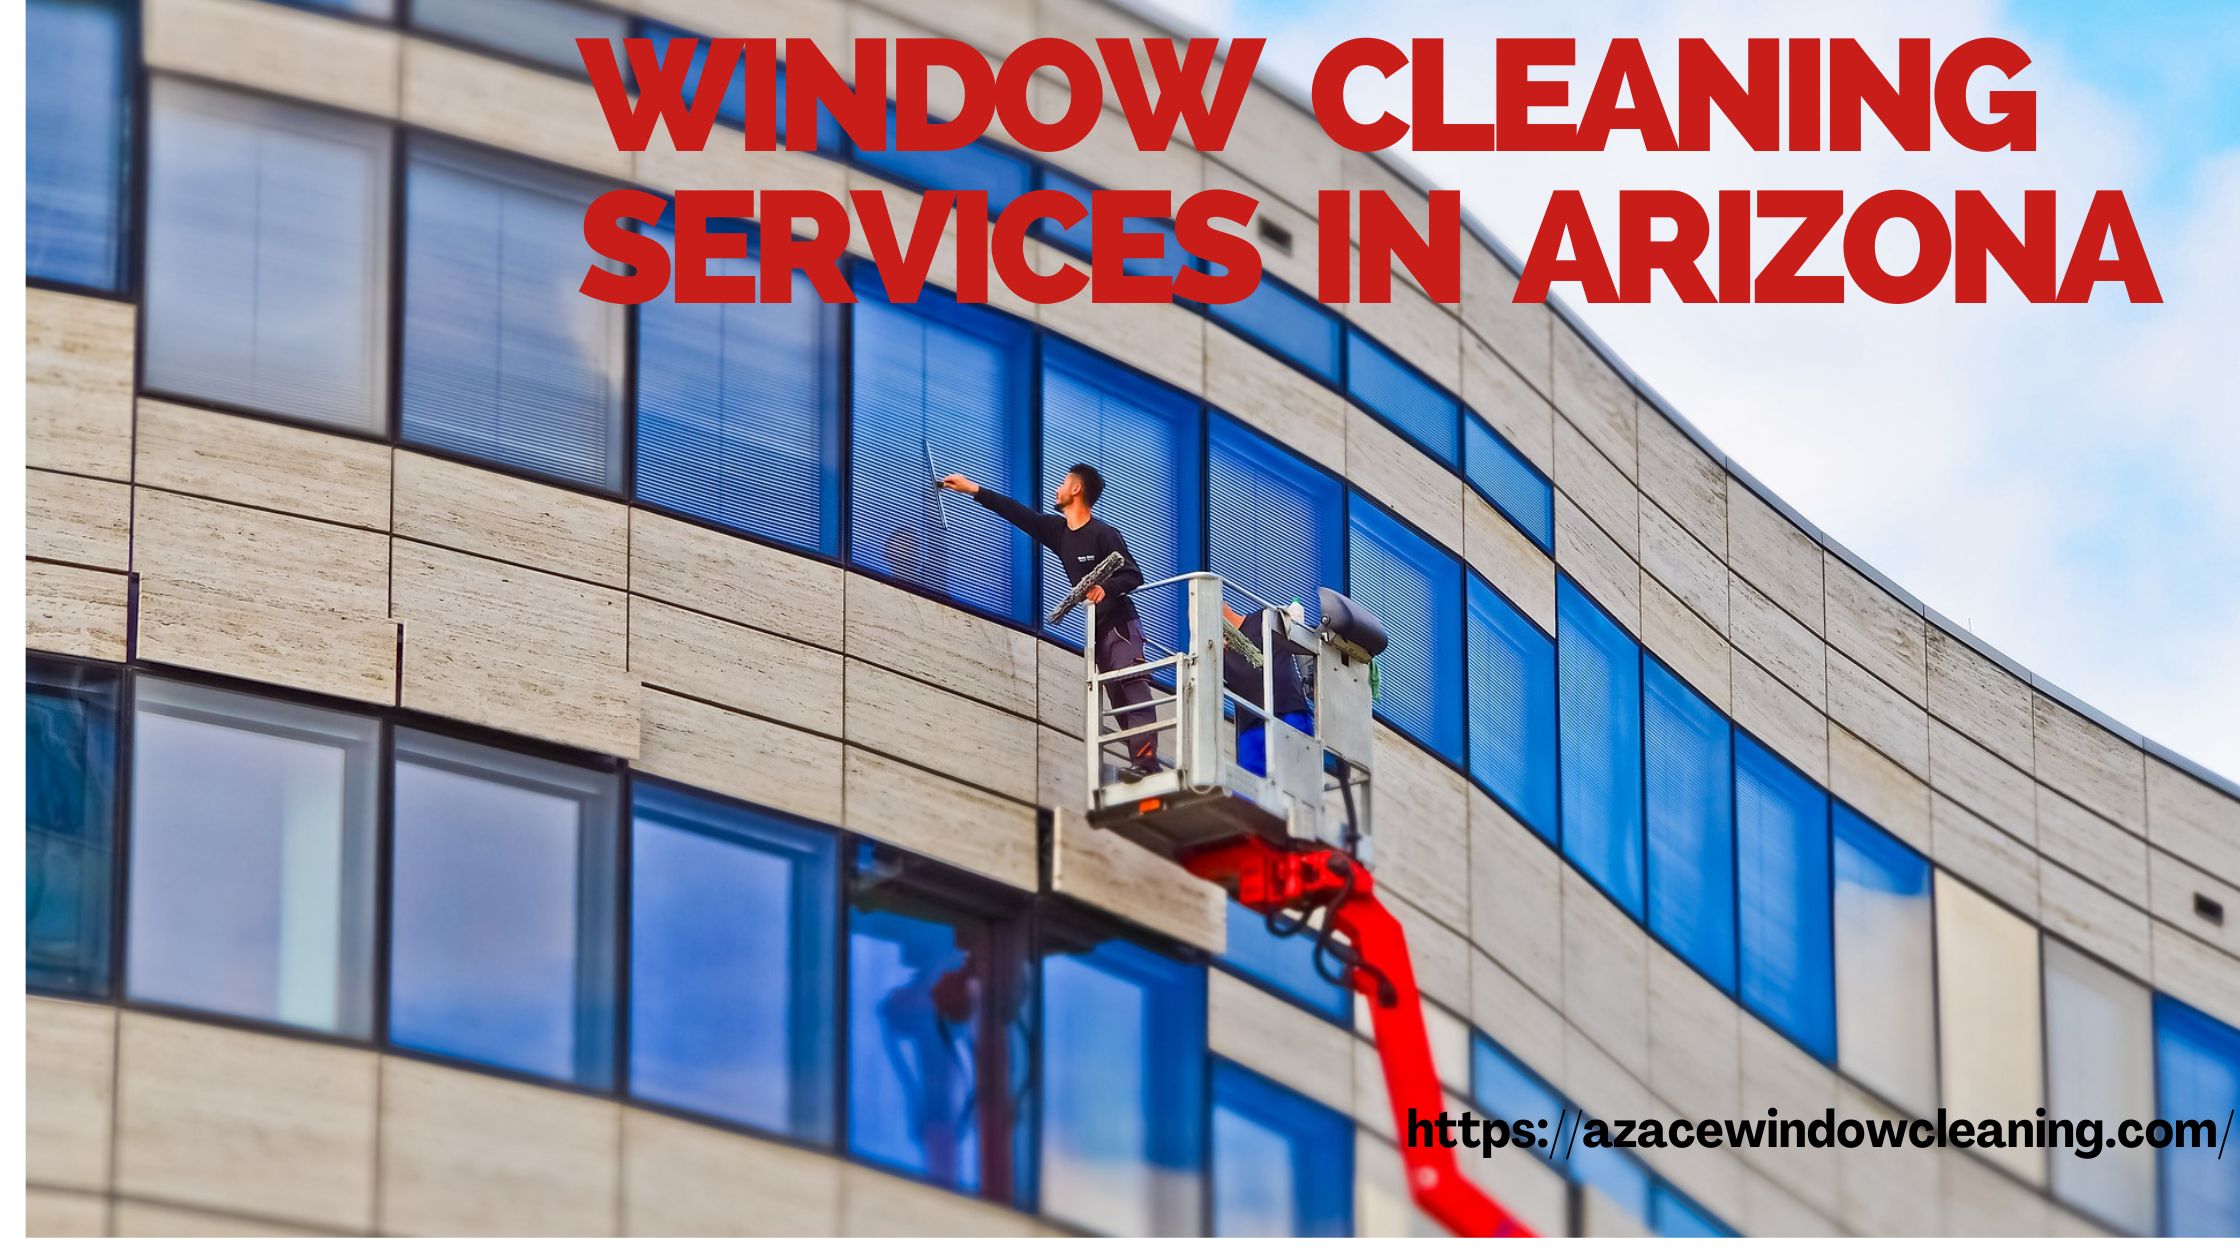 window cleaning services in arizona